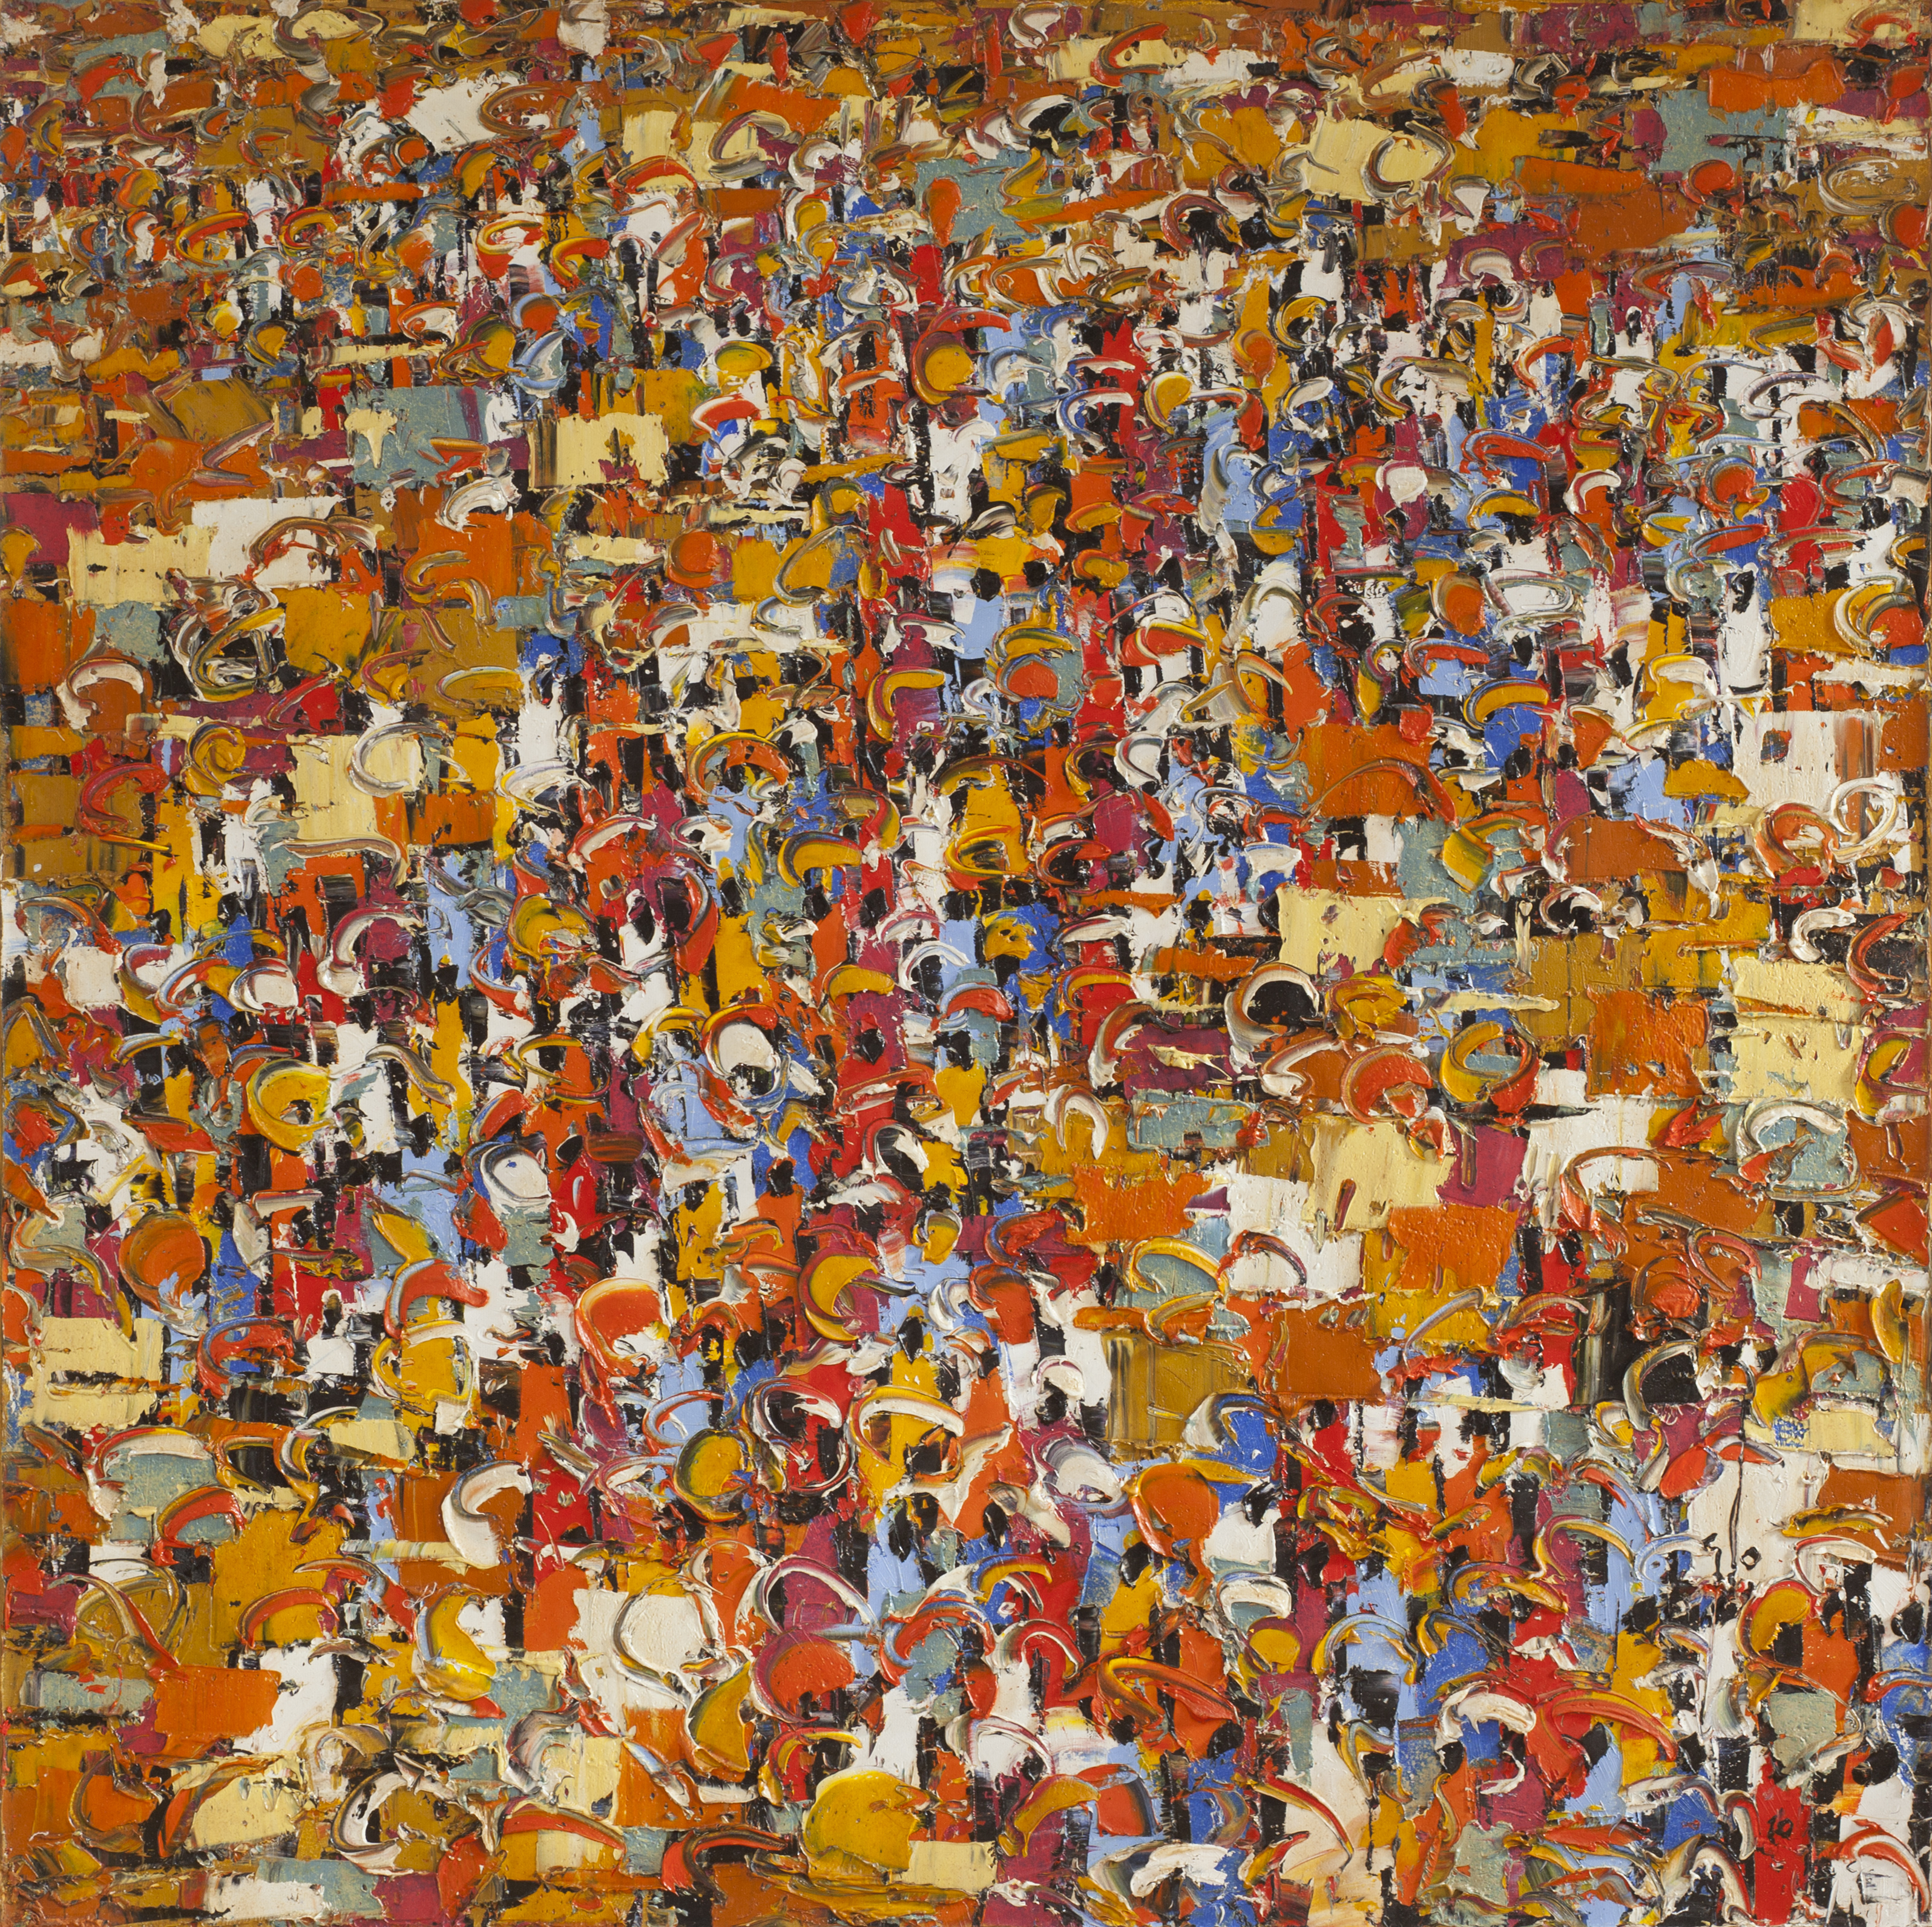 Ablade Glover, Market Intrigues, 2010, Oil on canvas